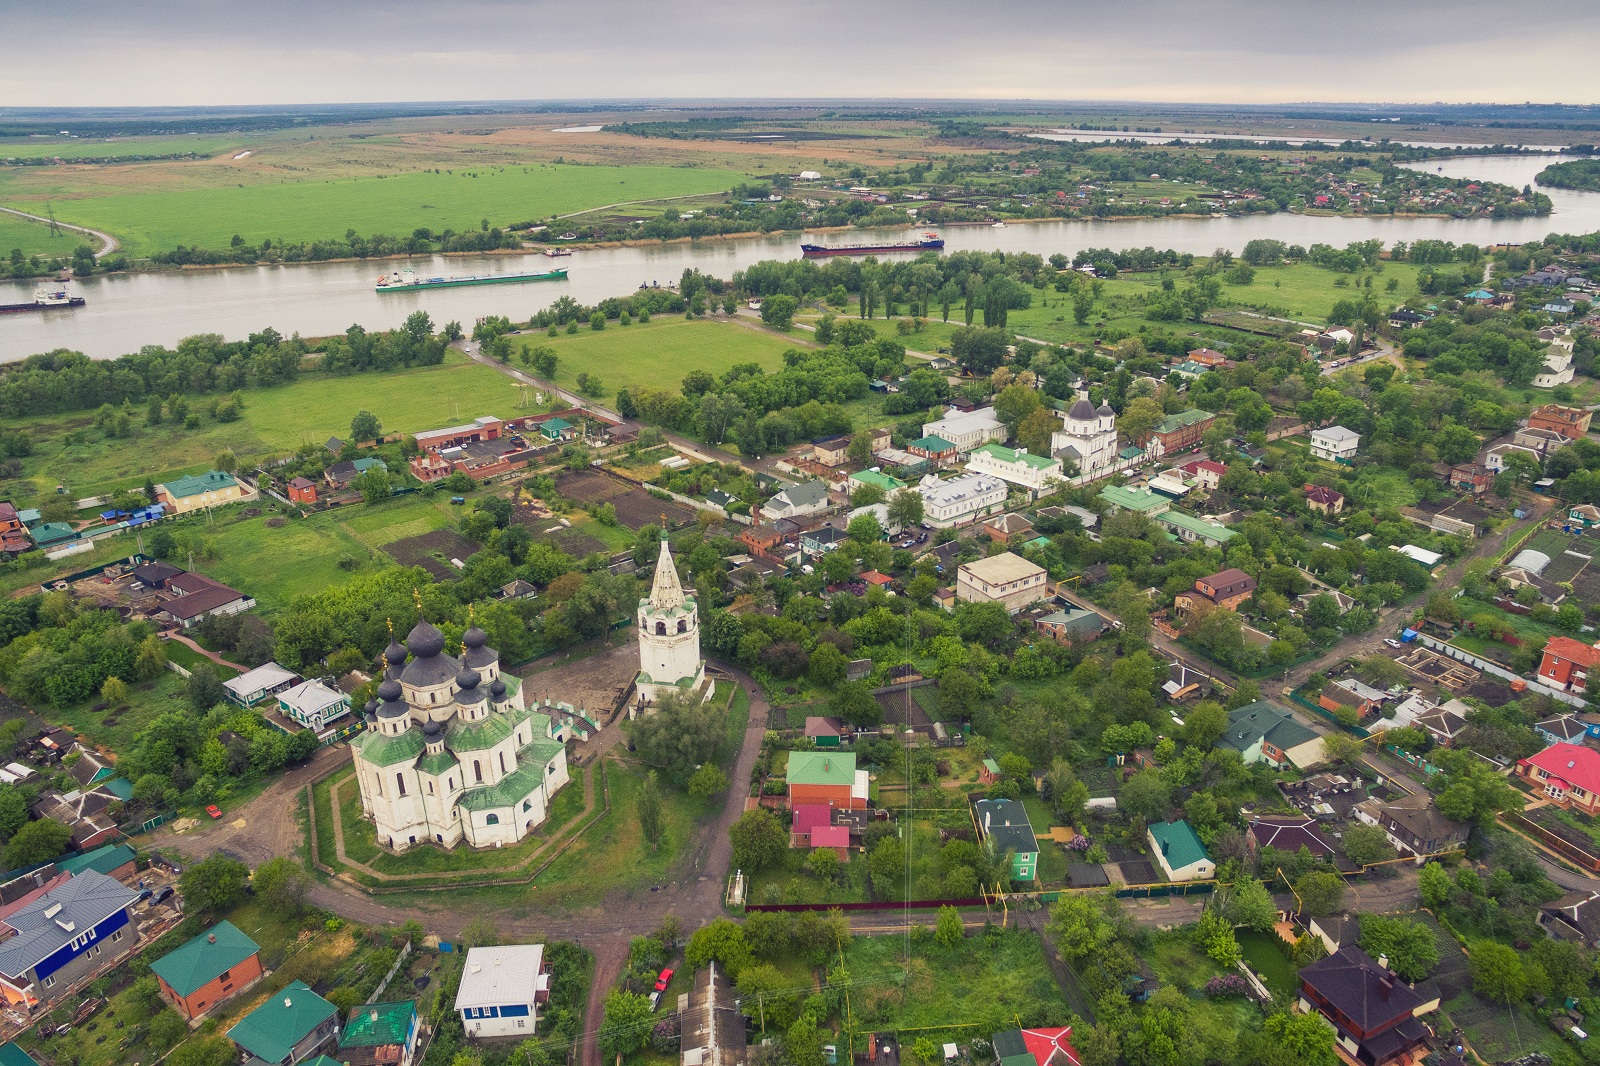 The_settlement_of_Starocherkasskaya_features_authentic_culture_and_scenic_landscapes_The_settlement_holds_multiple_festivals_throughout_the_year.jpg